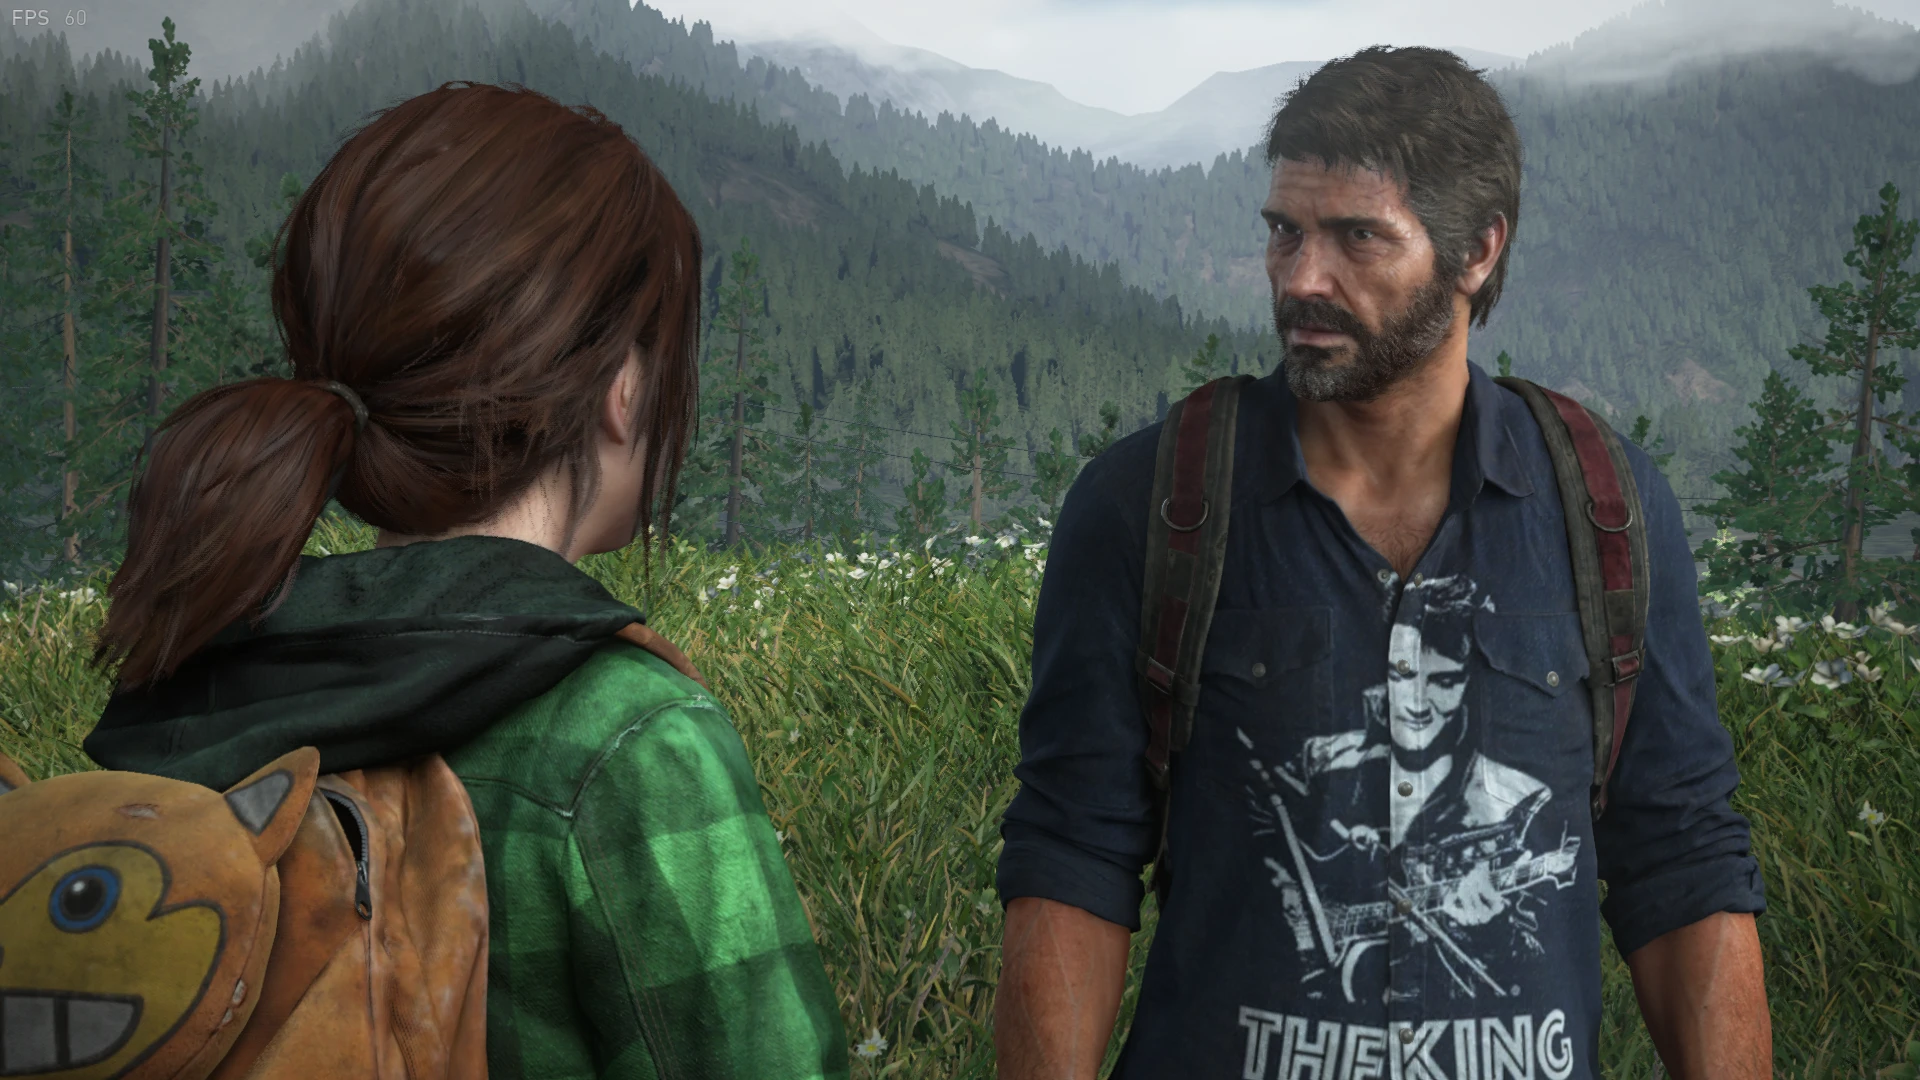 Topic · The last of us ·